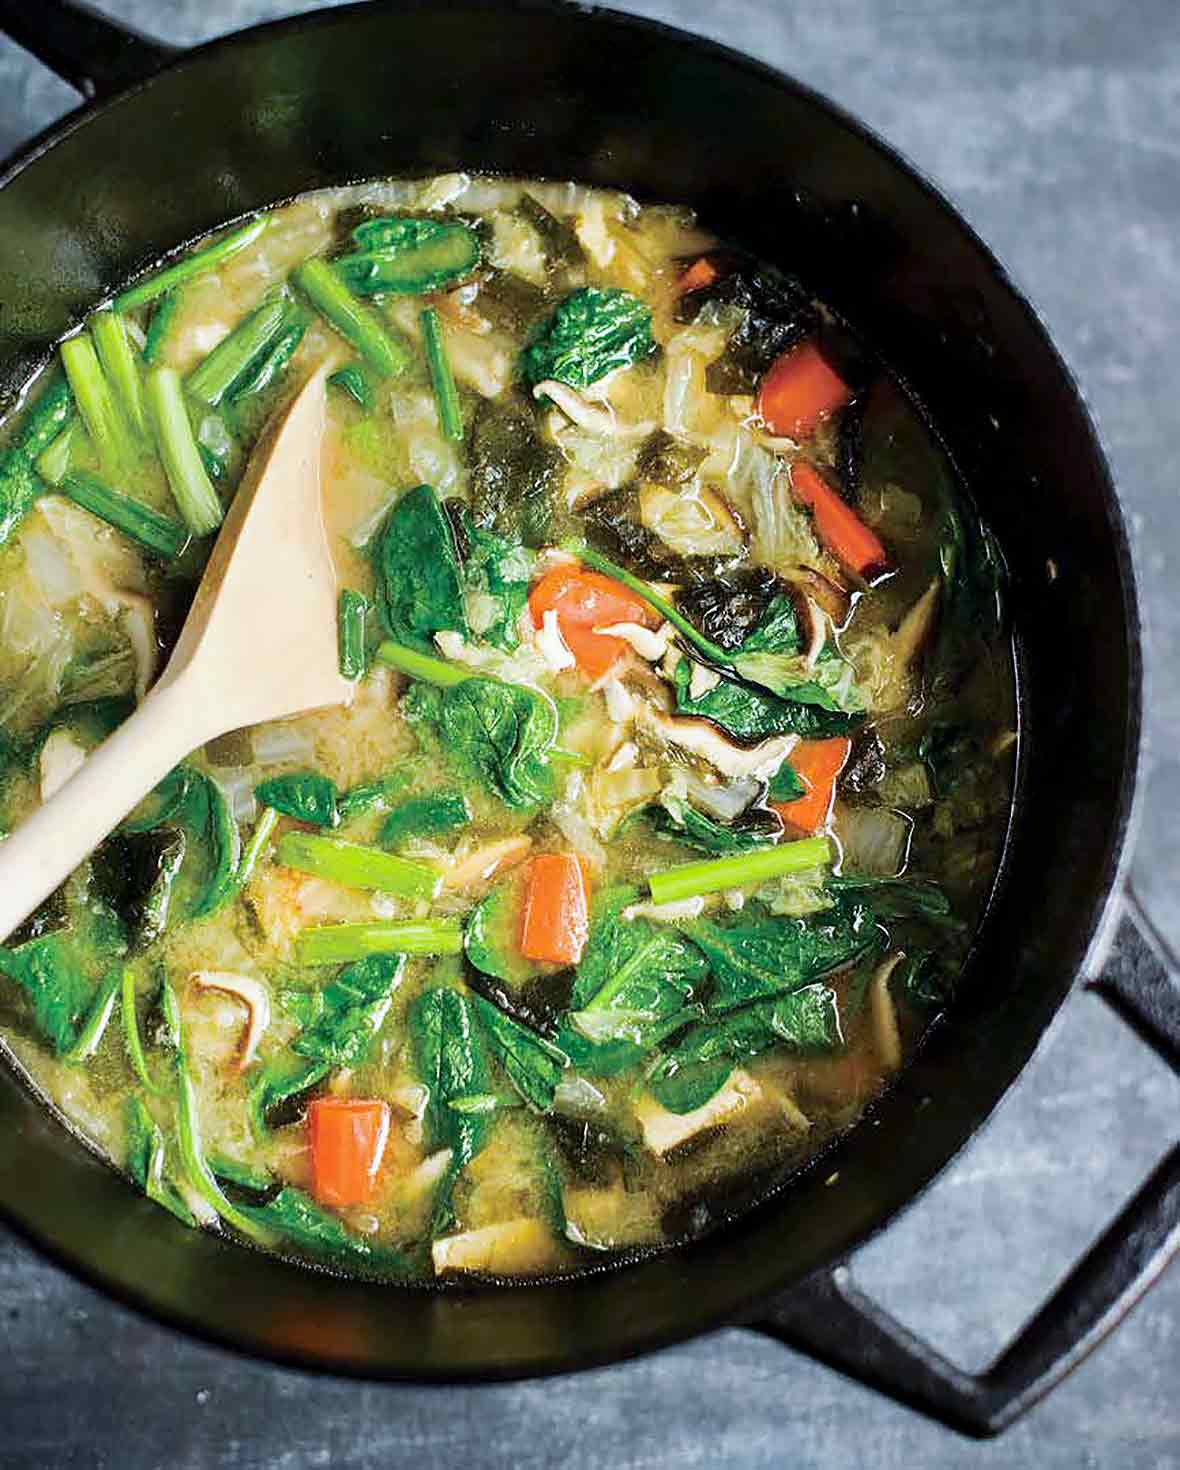 A steel wok filled with mushrooms, greens, broth, and carrots, with a wooden spoon resting inside